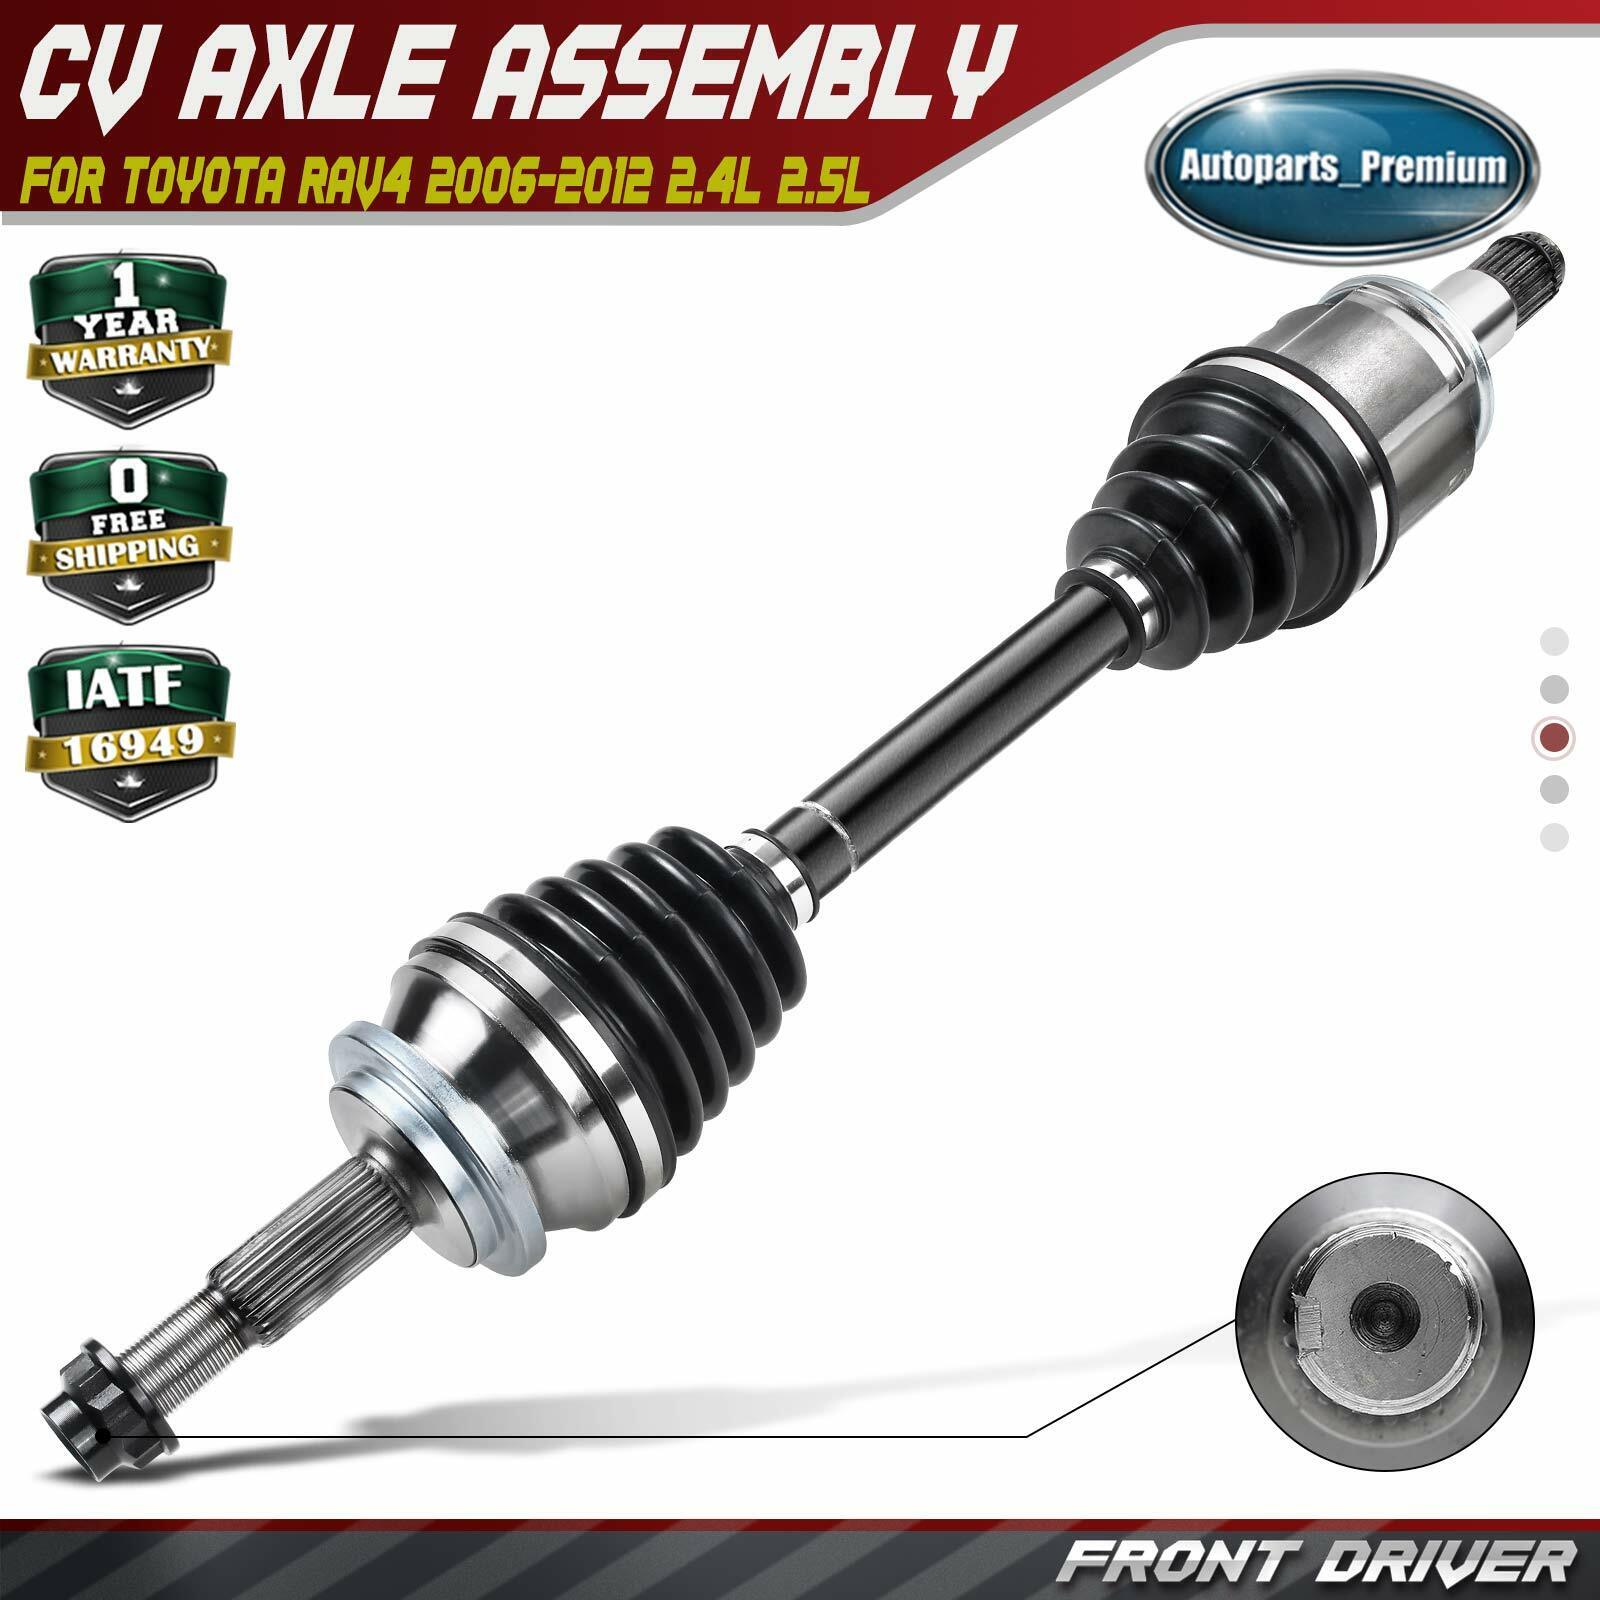 Front Driver CV Axle Assembly for Toyota RAV4 2006 2007 2008-2012 L4 2.4L 2.5L